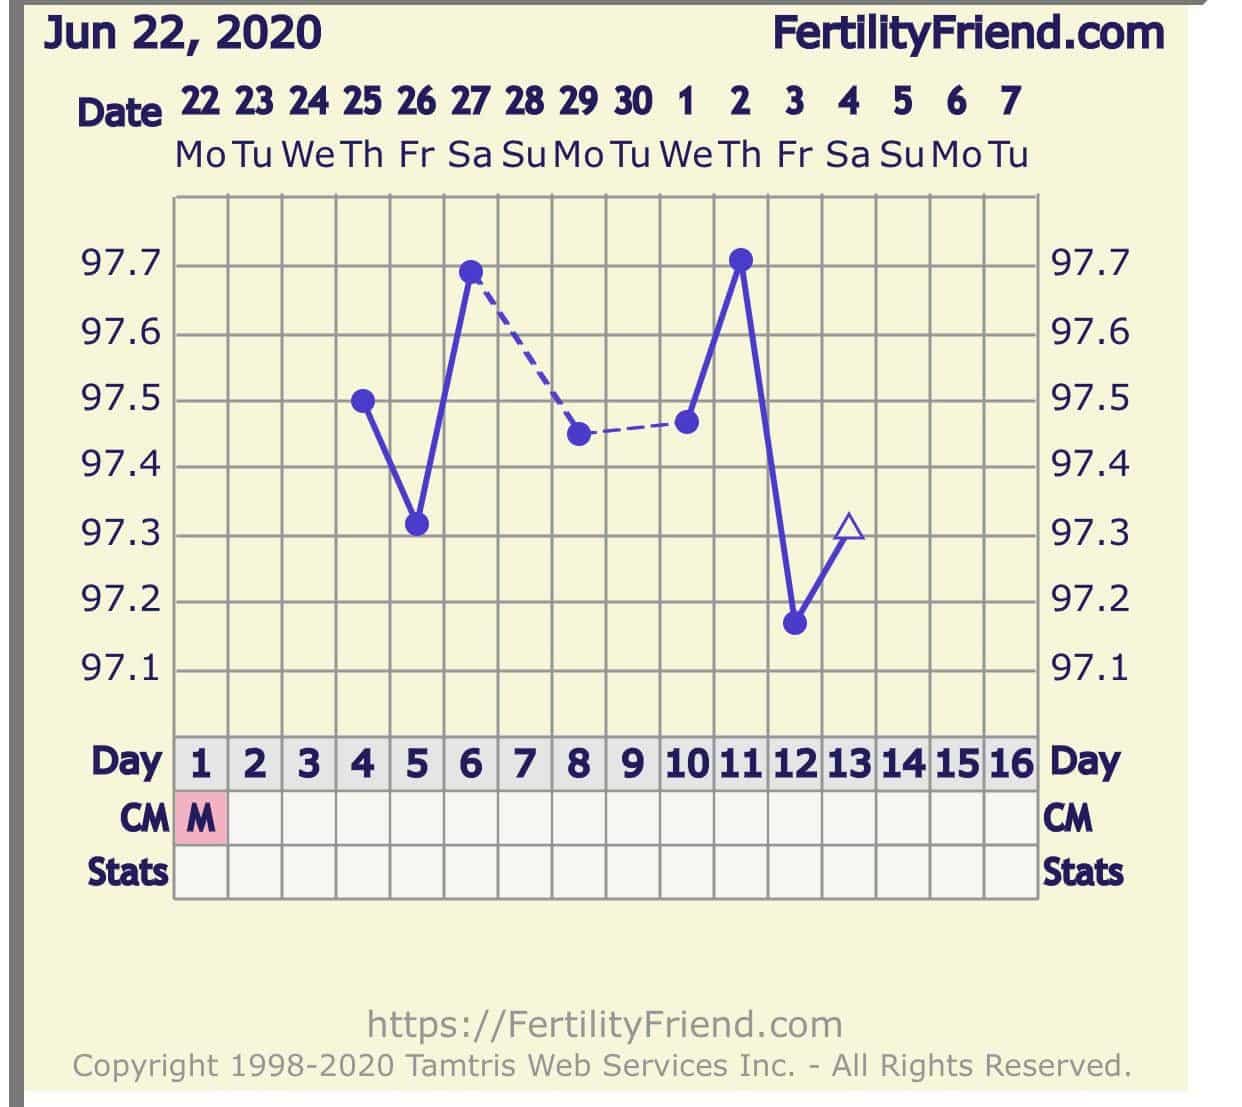 New to charting! Help interpret lol. Did I ovulate on day 12? My last ...